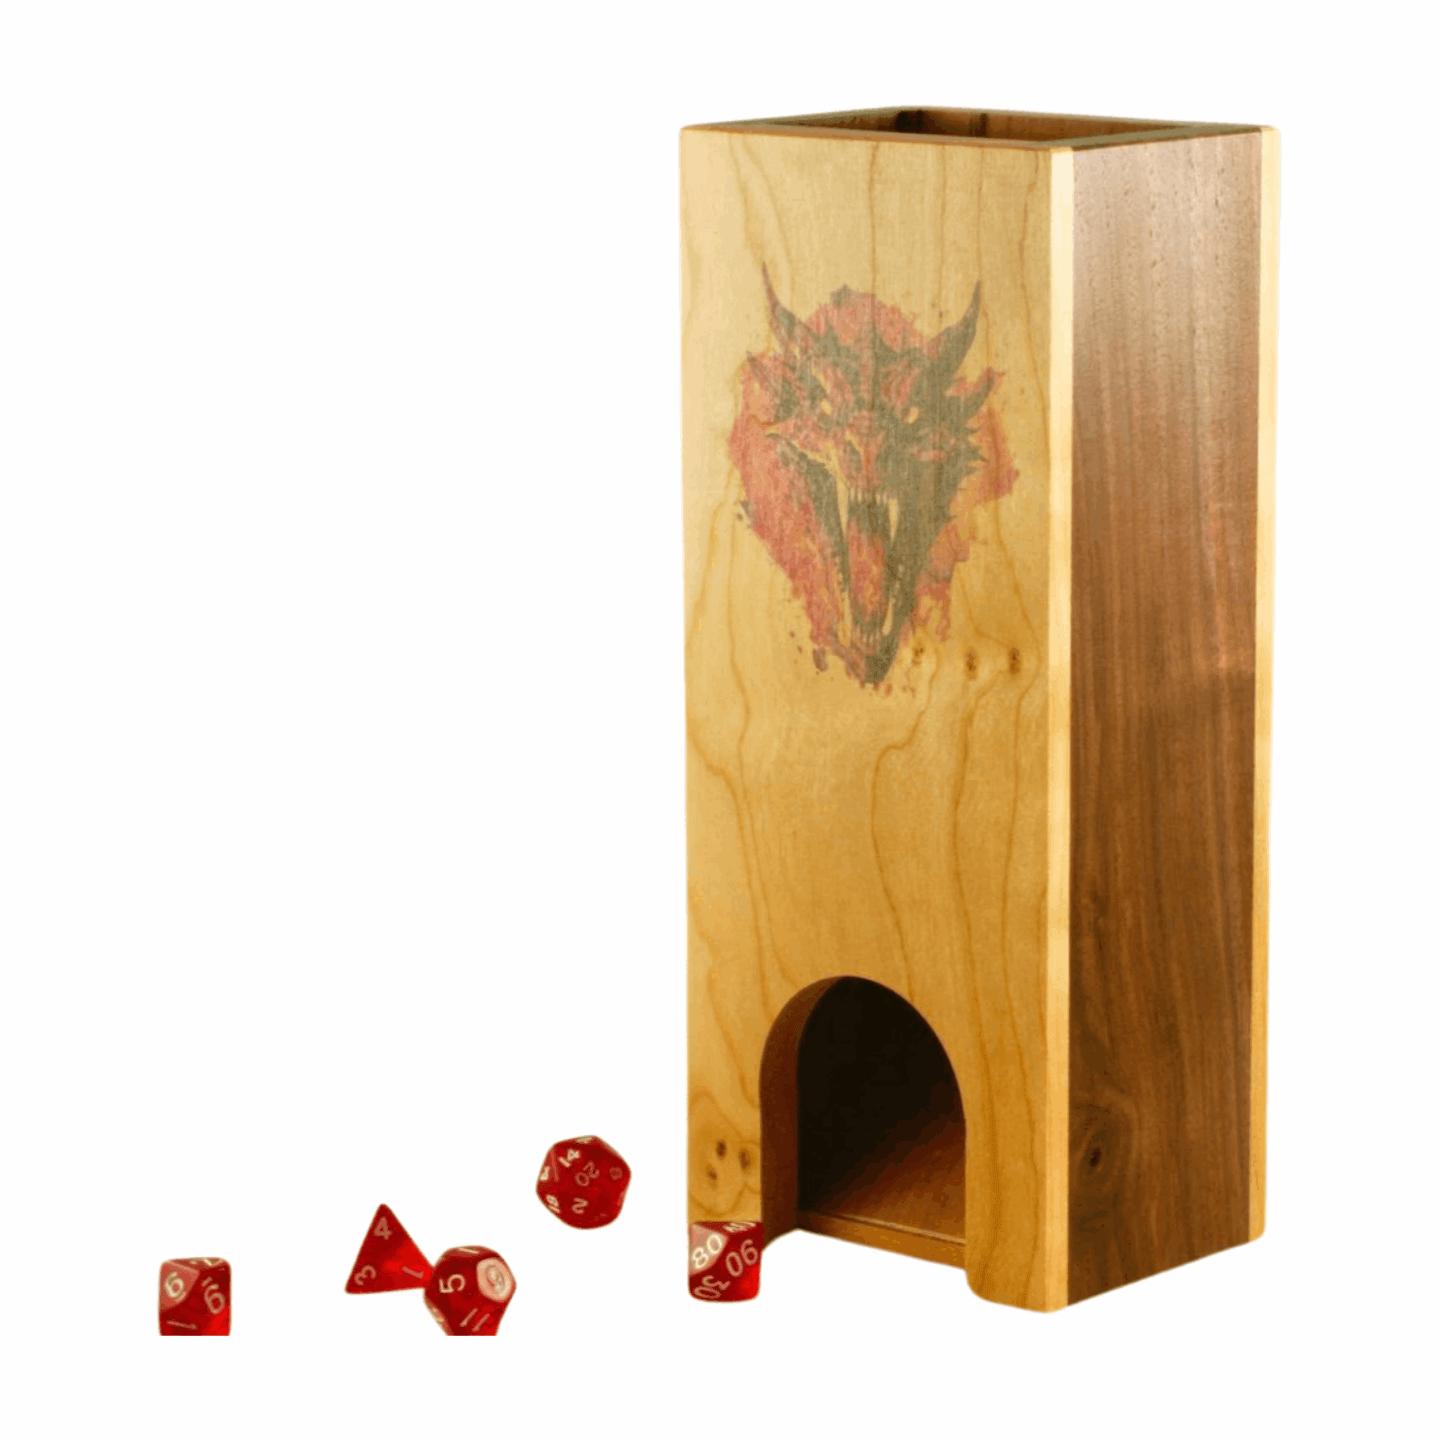 Cherry and Walnut Dice Tower with Red Dragon - Dragon Armor Games